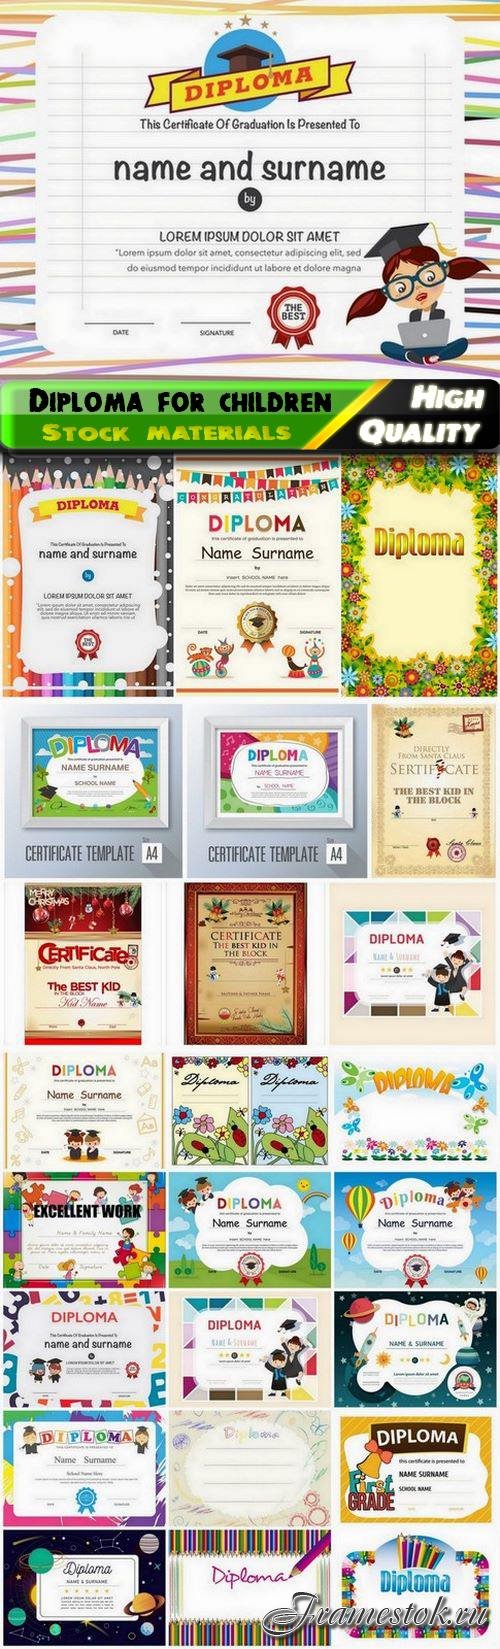 Greeting certificate and diploma for children and kids - 25 Eps